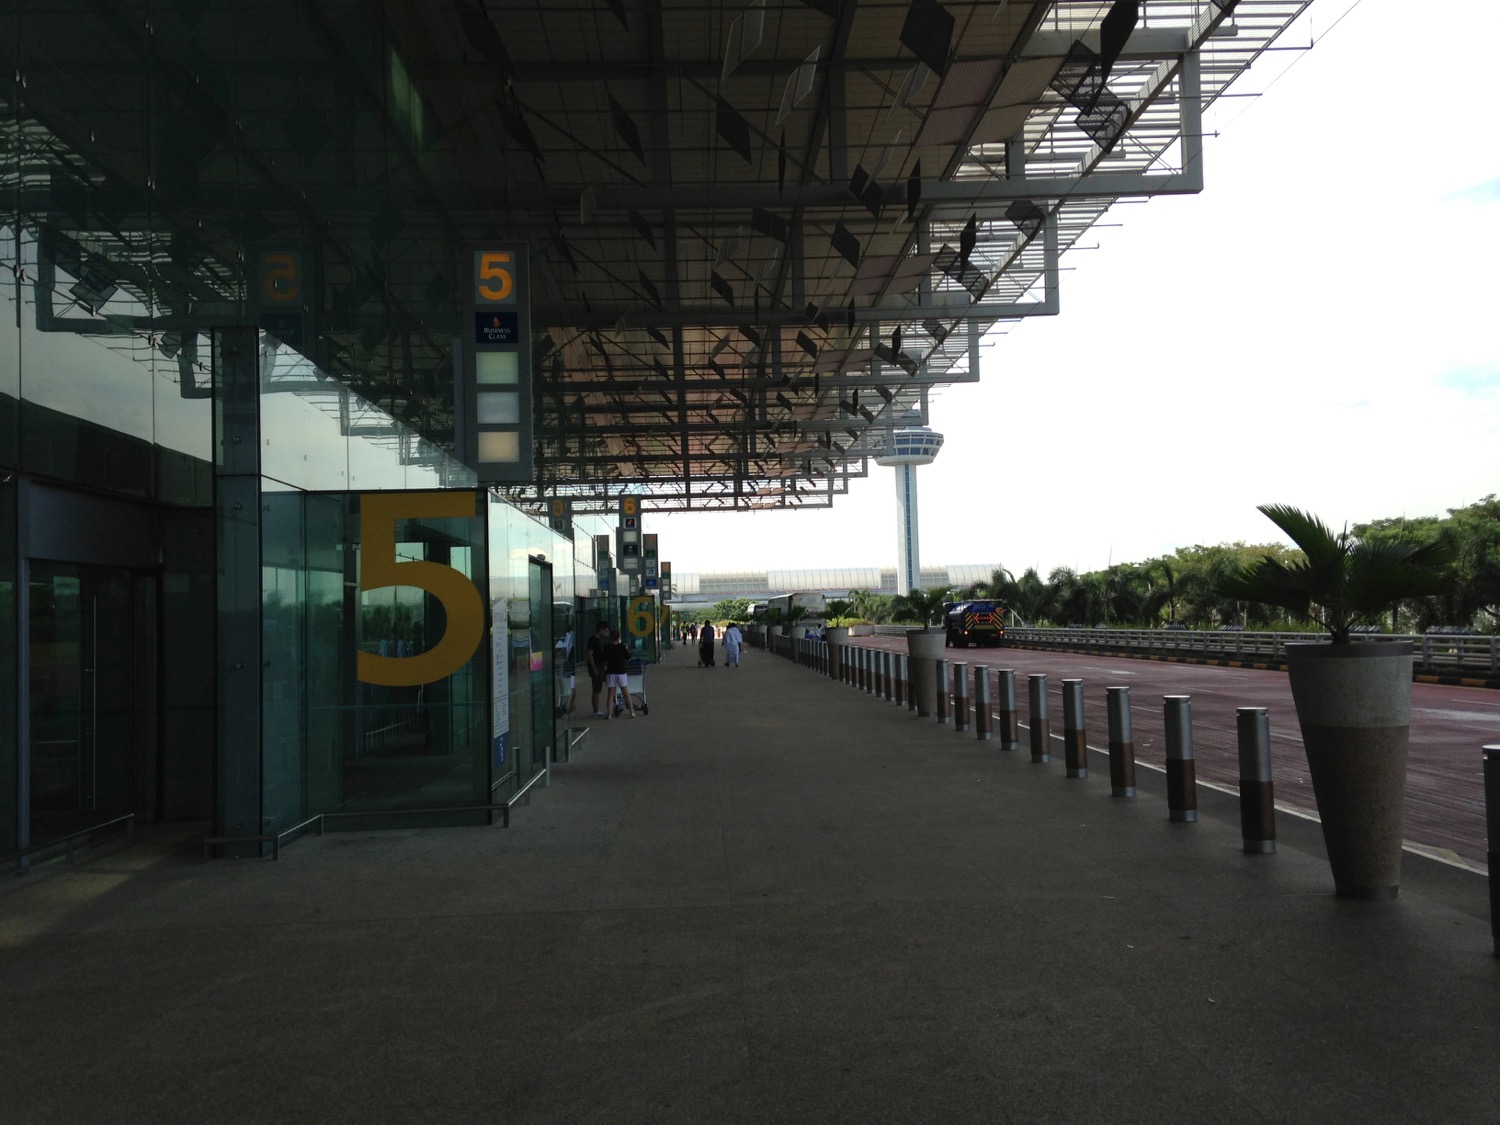 a walkway with glass walls and a building with numbers